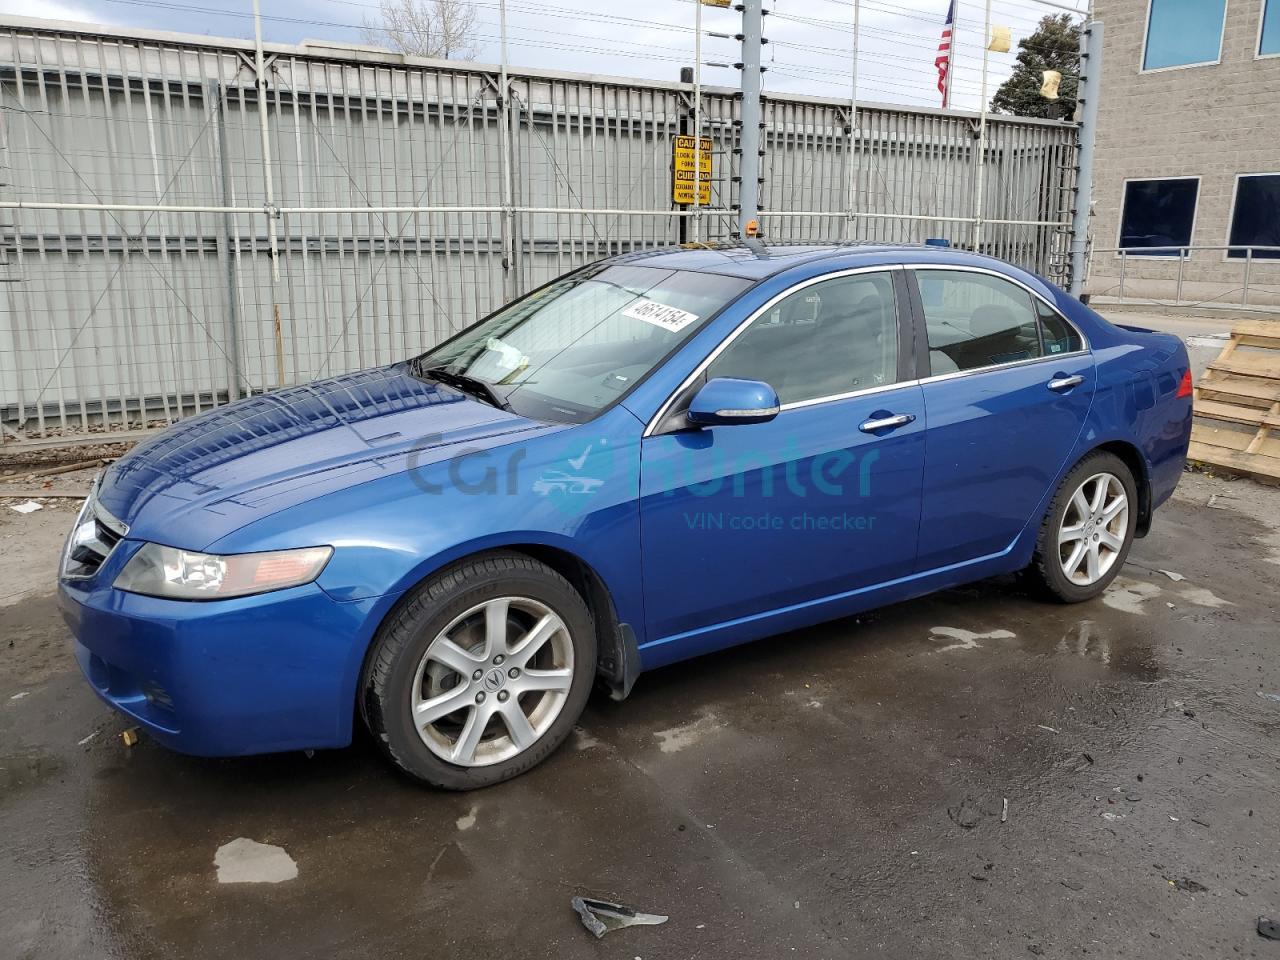 acura tsx 2005 jh4cl96865c005651